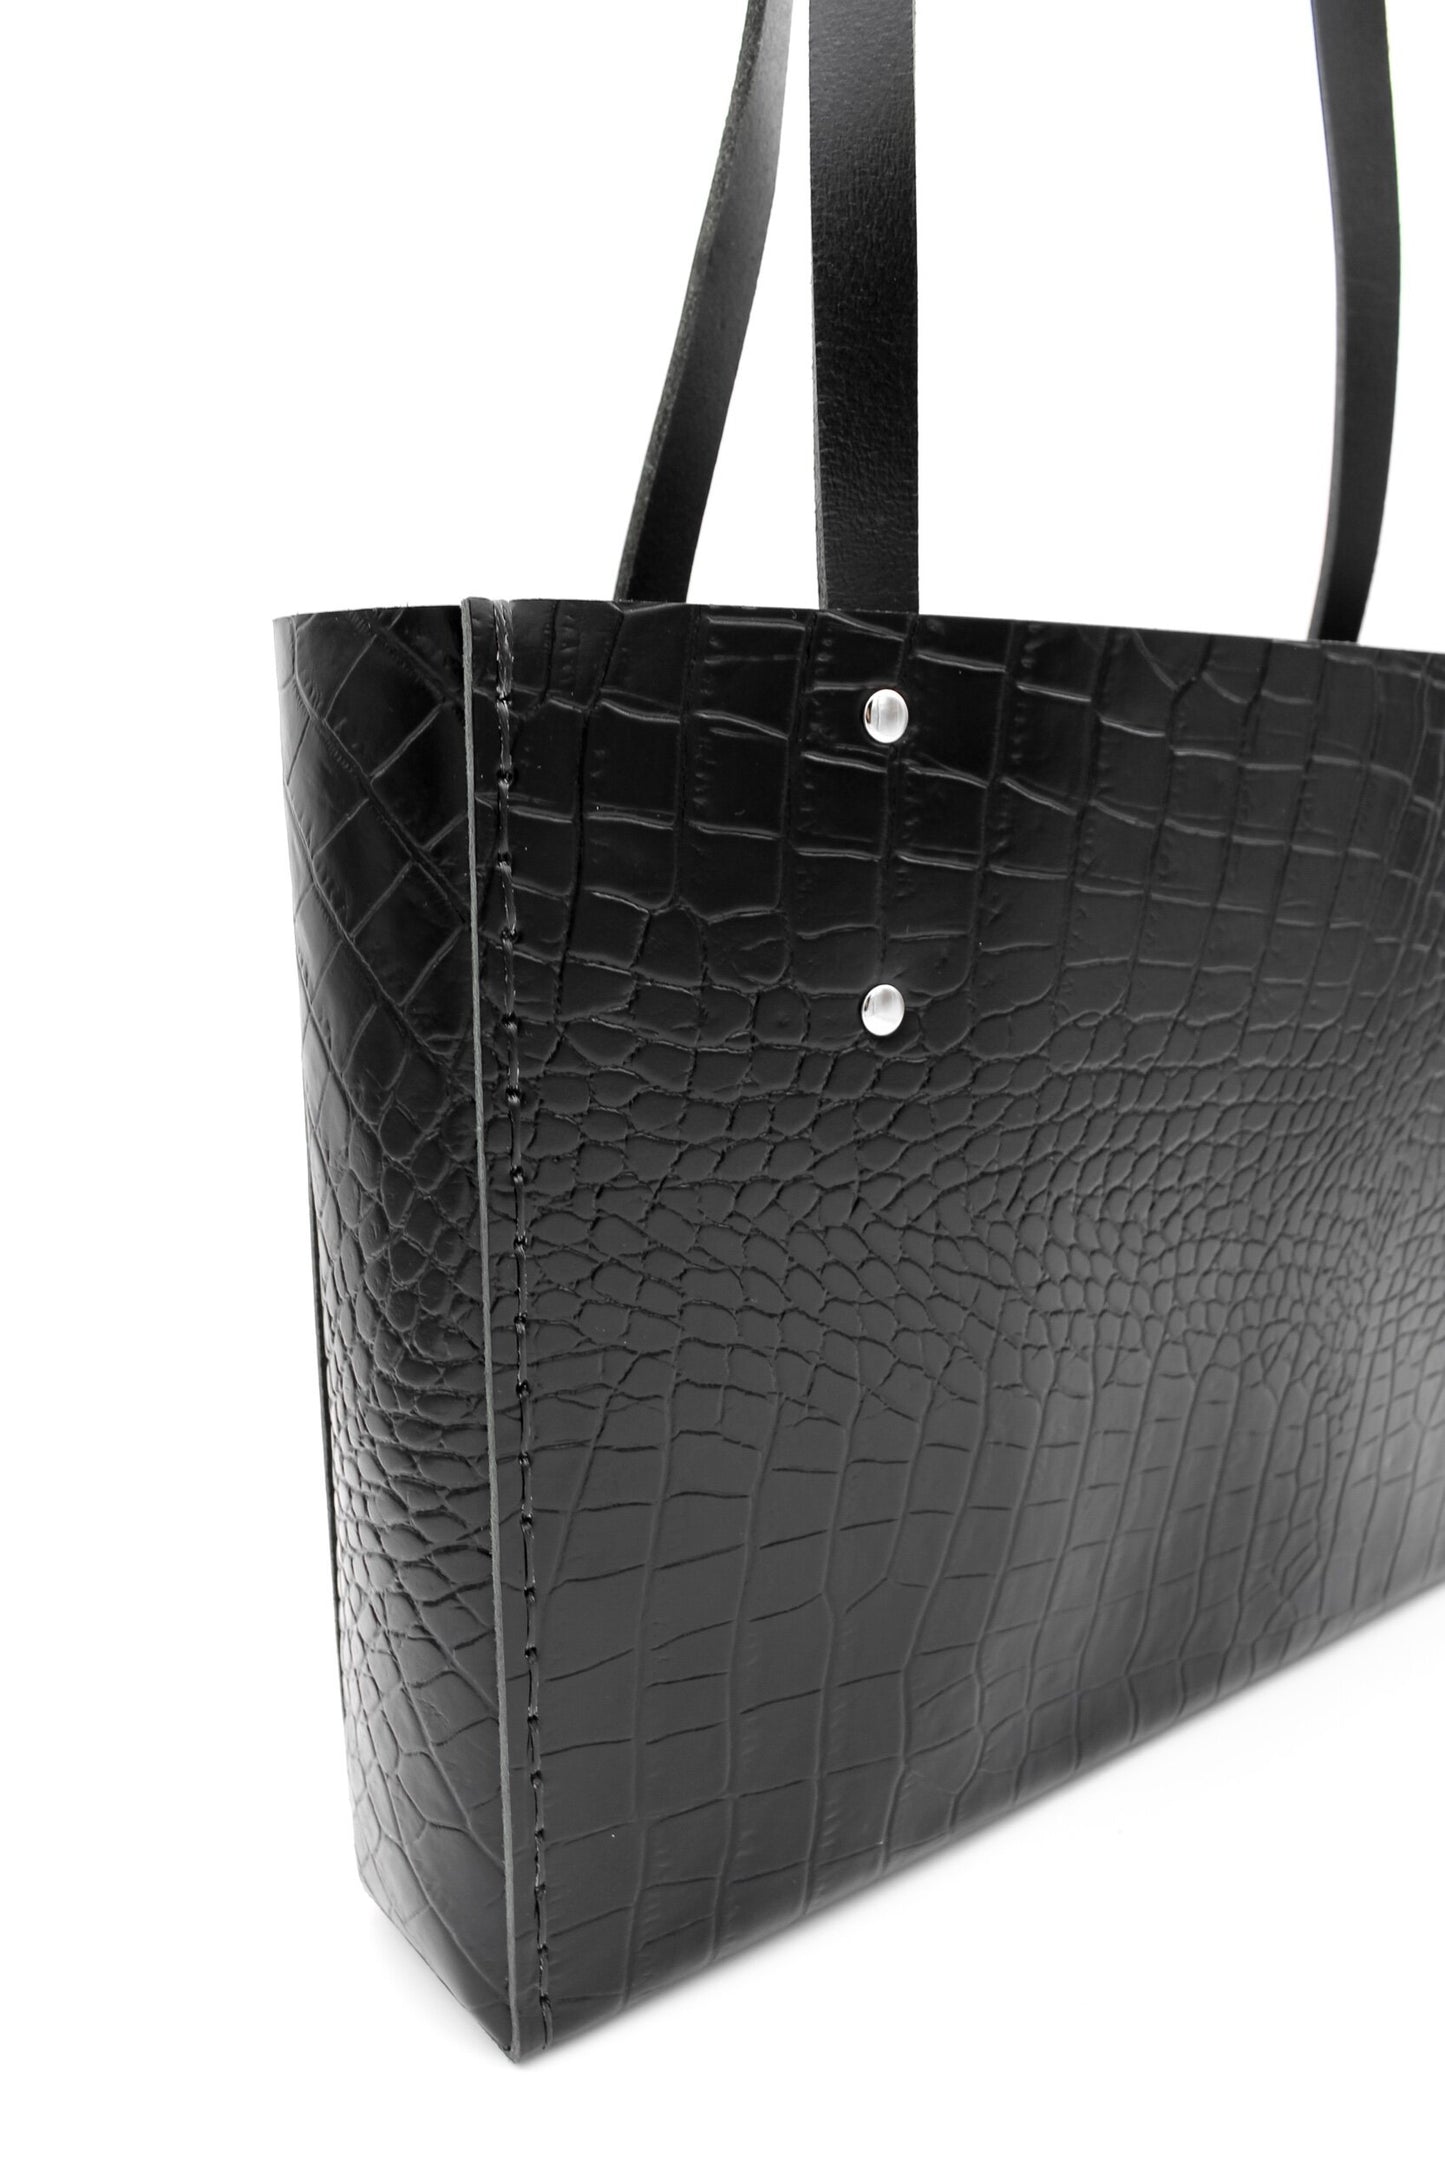 The Blanche Tote - black croc embossed